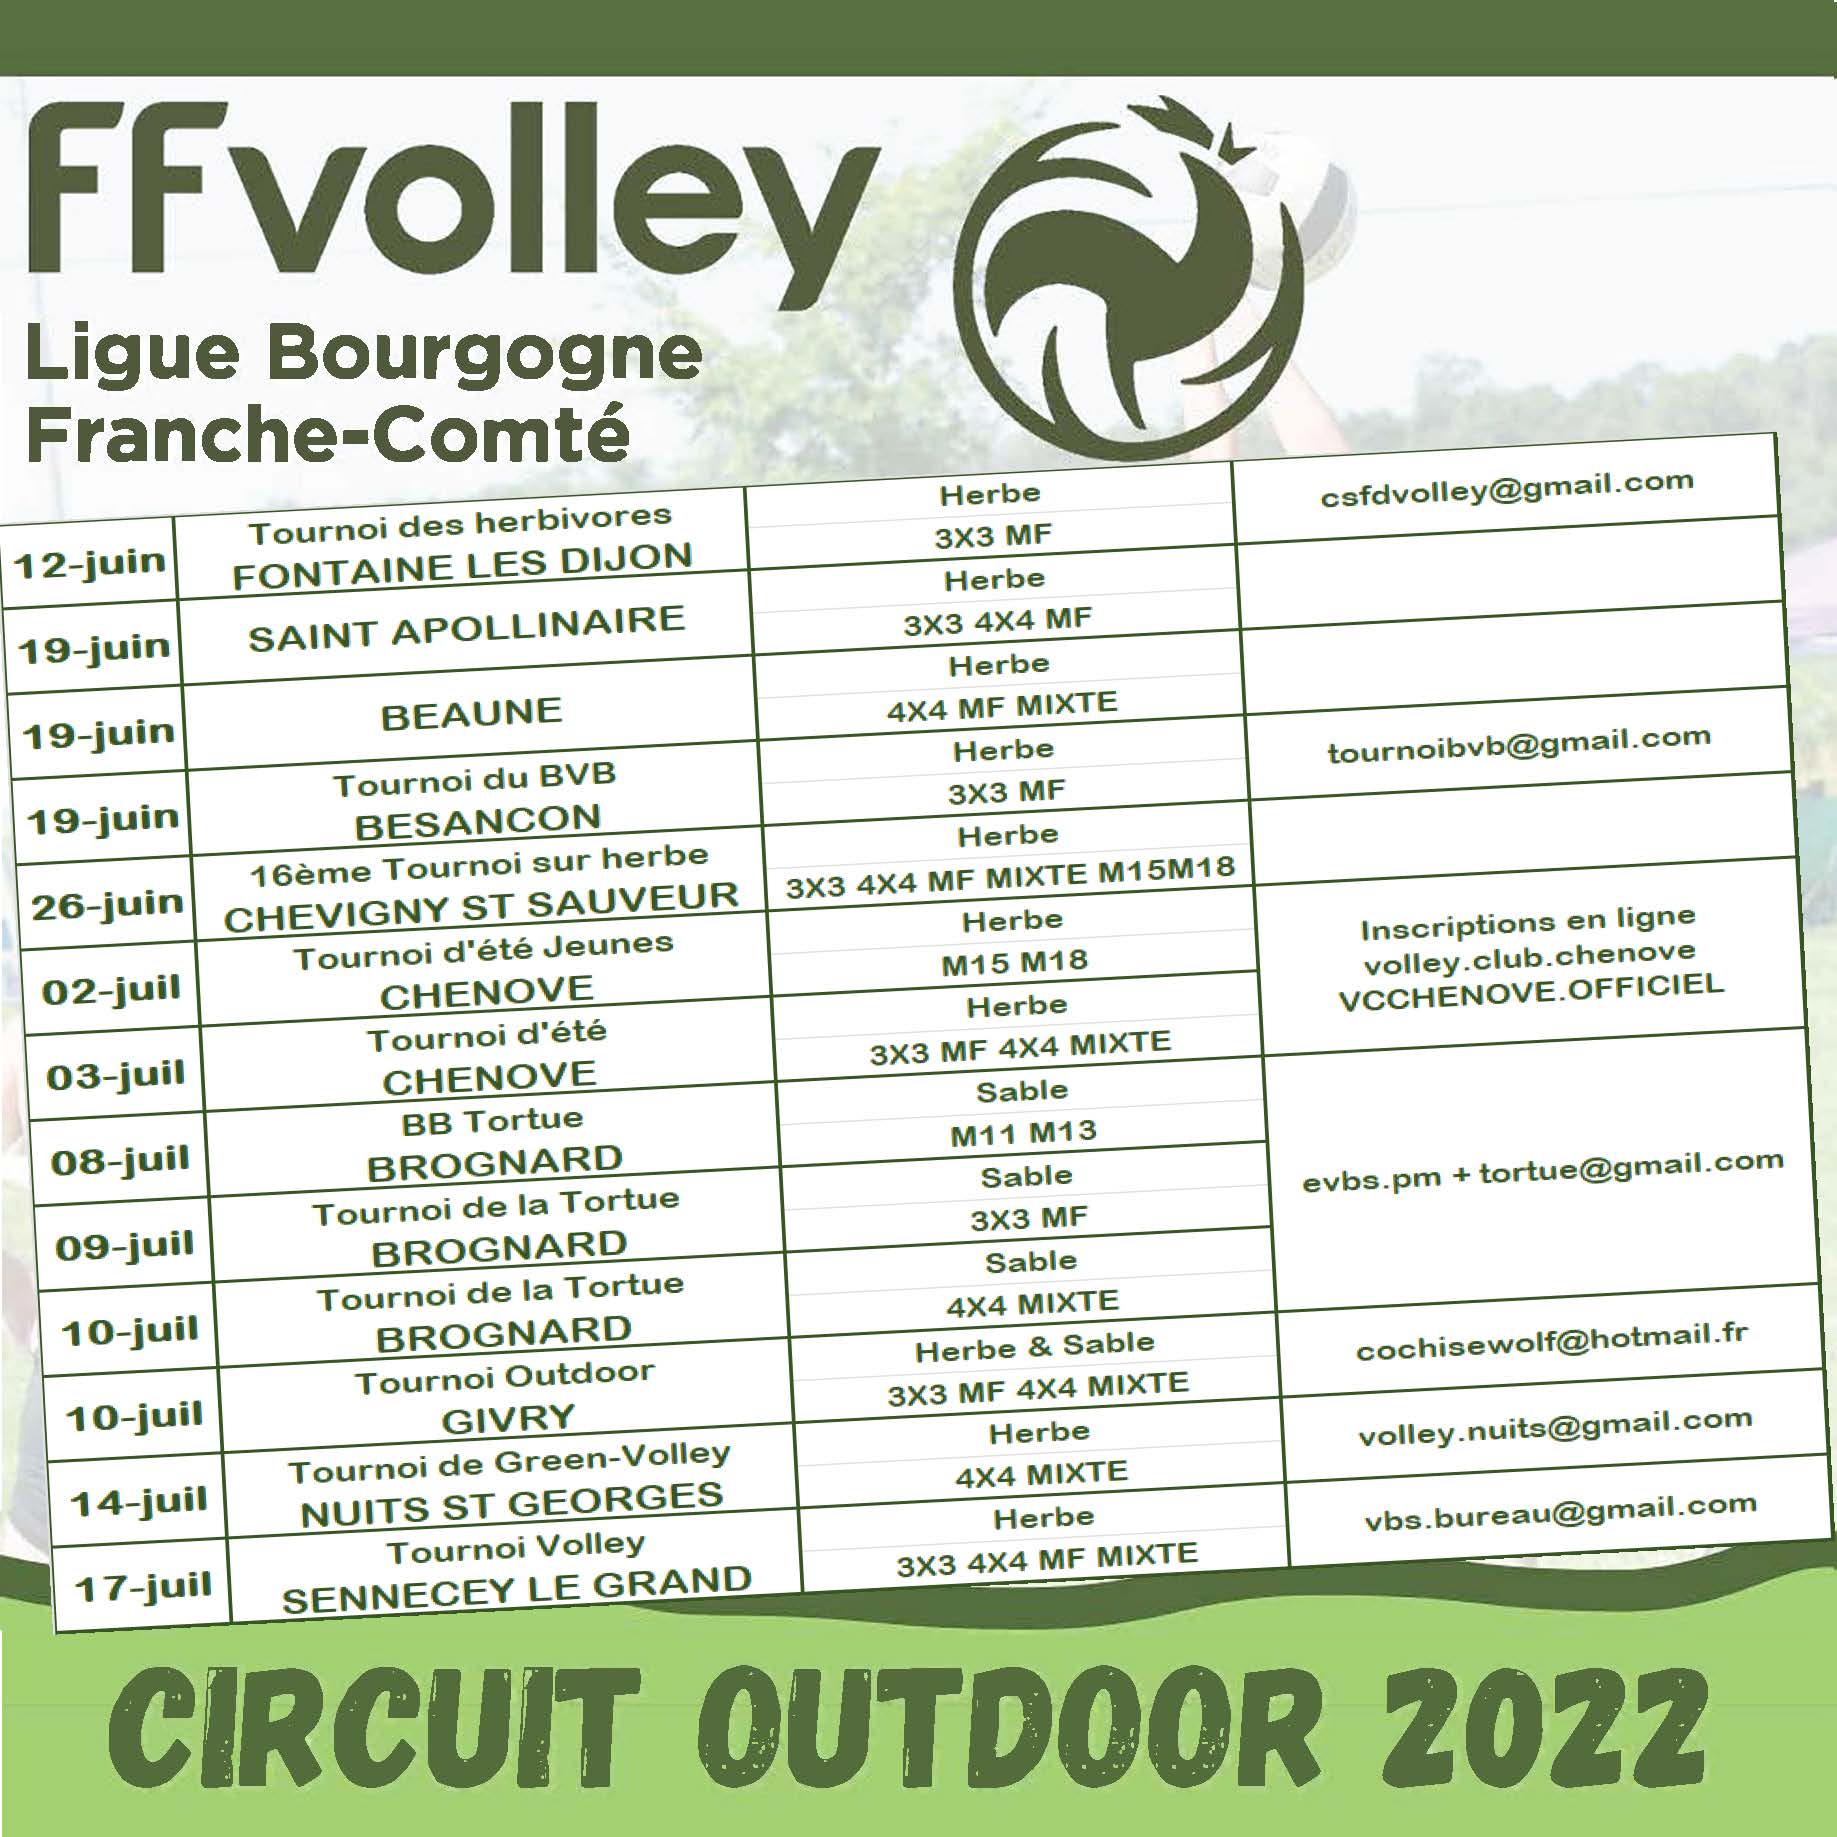 Circuit Outdoor 2022 Calendrier detaille 1